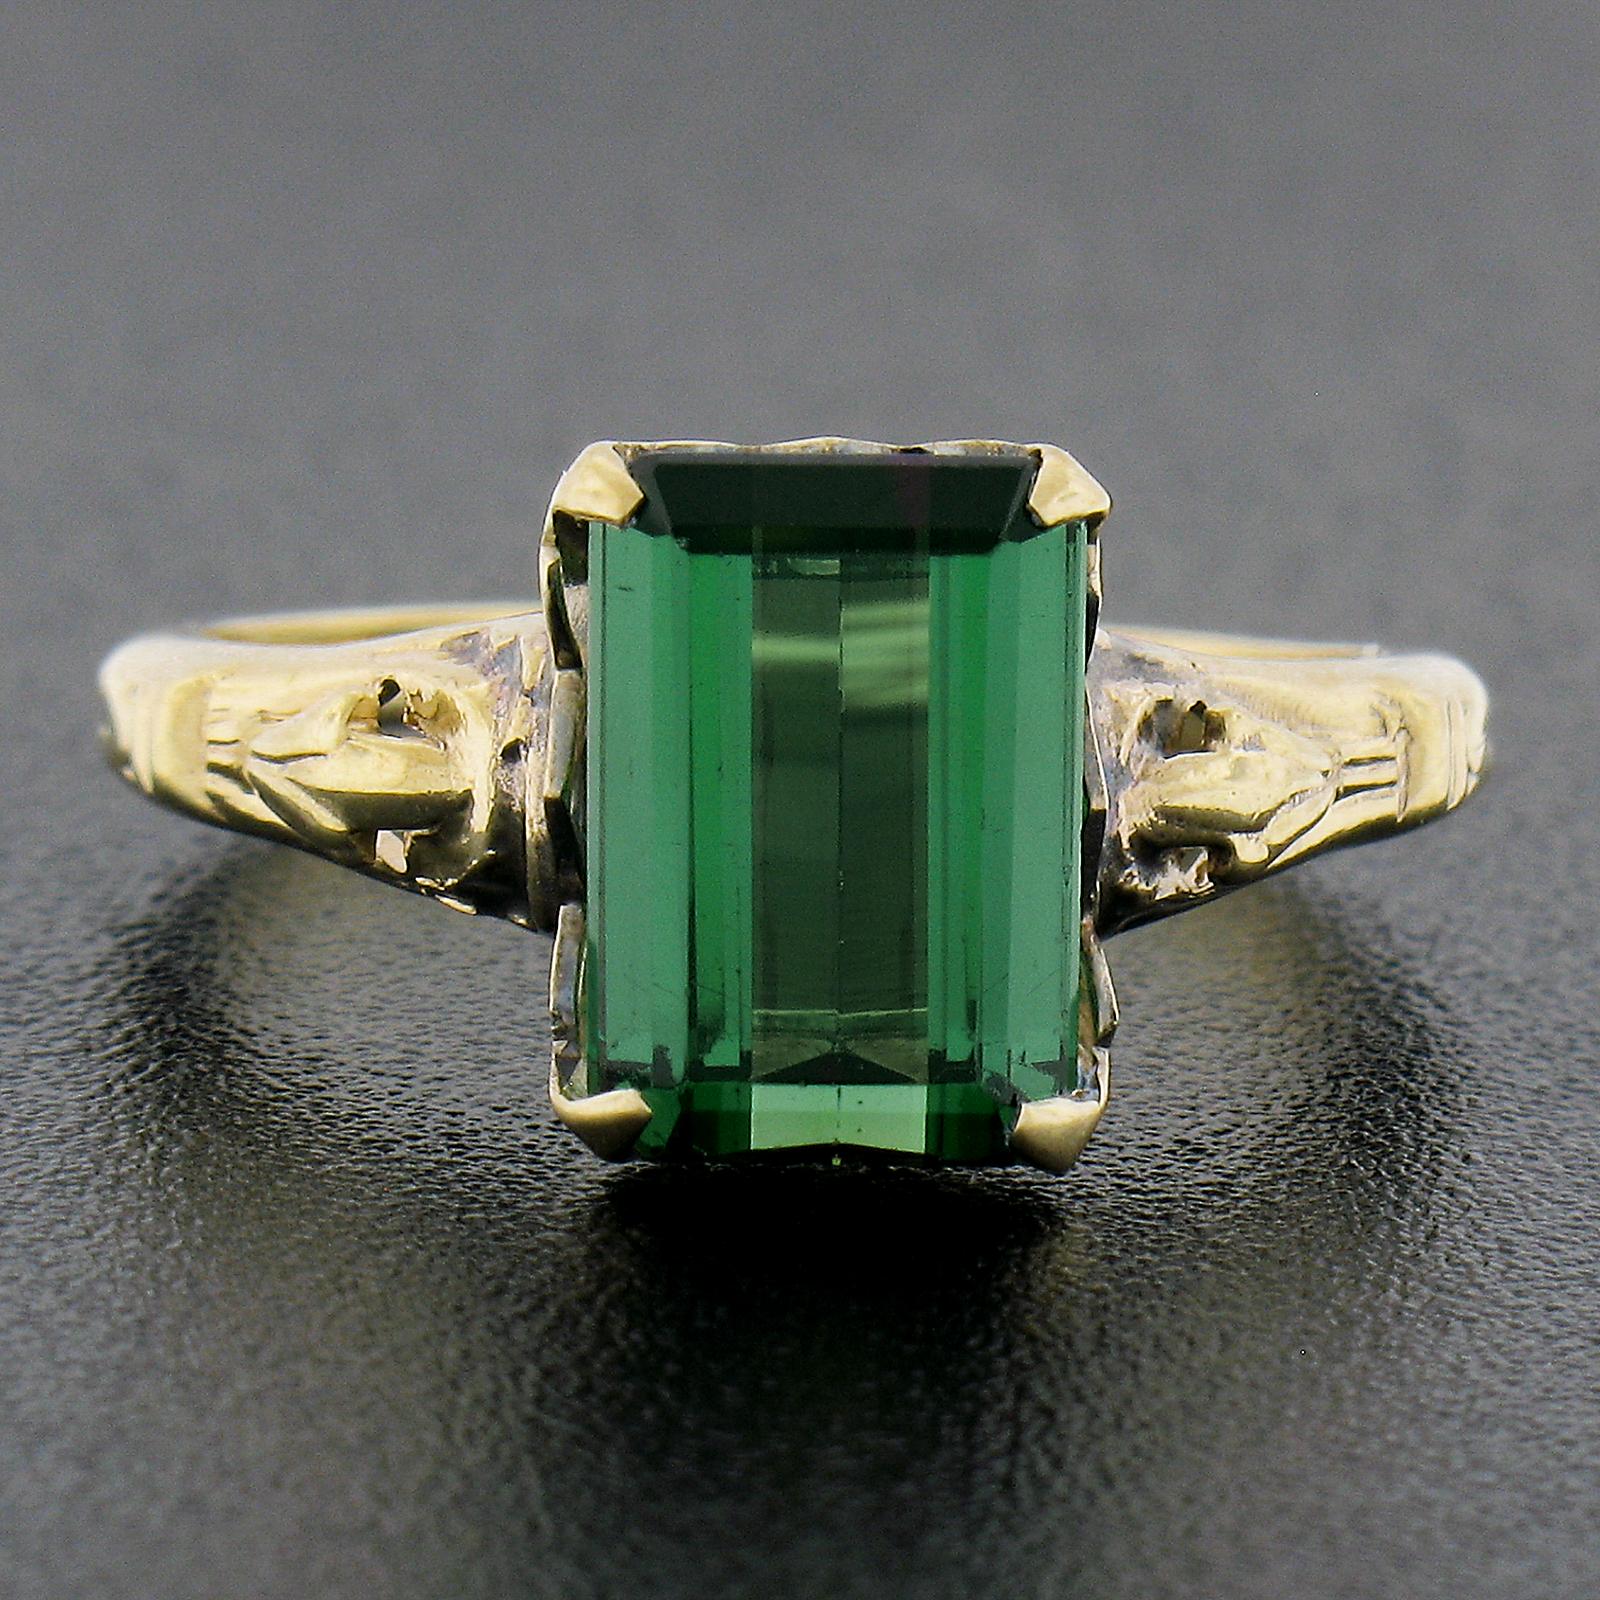 Vintage 10K Yellow Gold 2.64ct Emerald Cut Green Tourmaline Solitaire Band Ring In Good Condition For Sale In Montclair, NJ